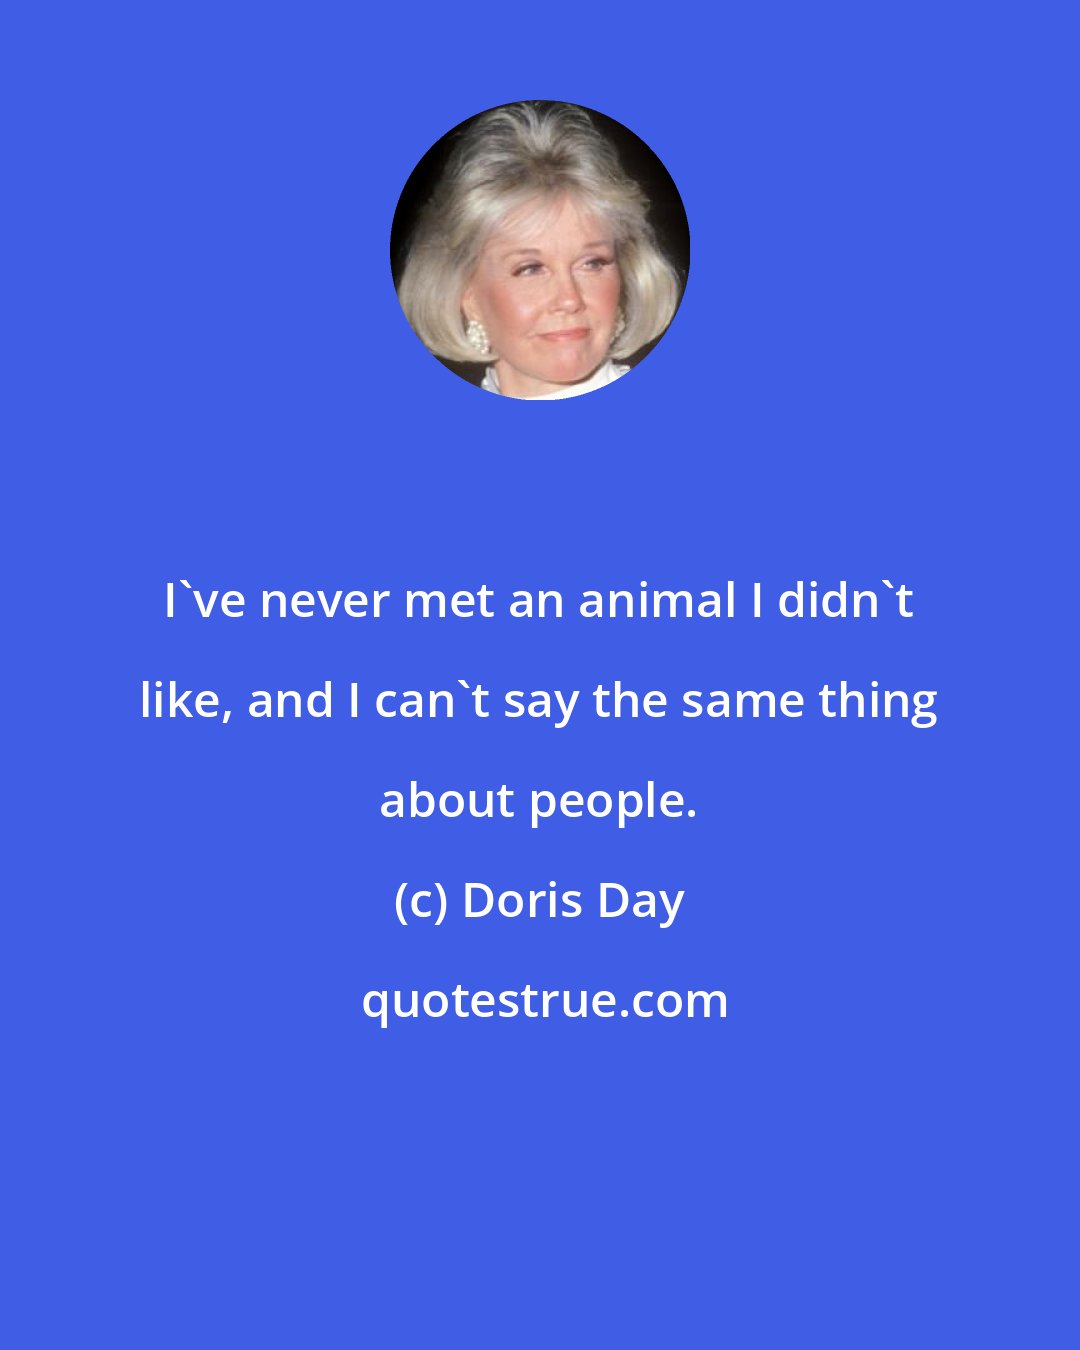 Doris Day: I've never met an animal I didn't like, and I can't say the same thing about people.